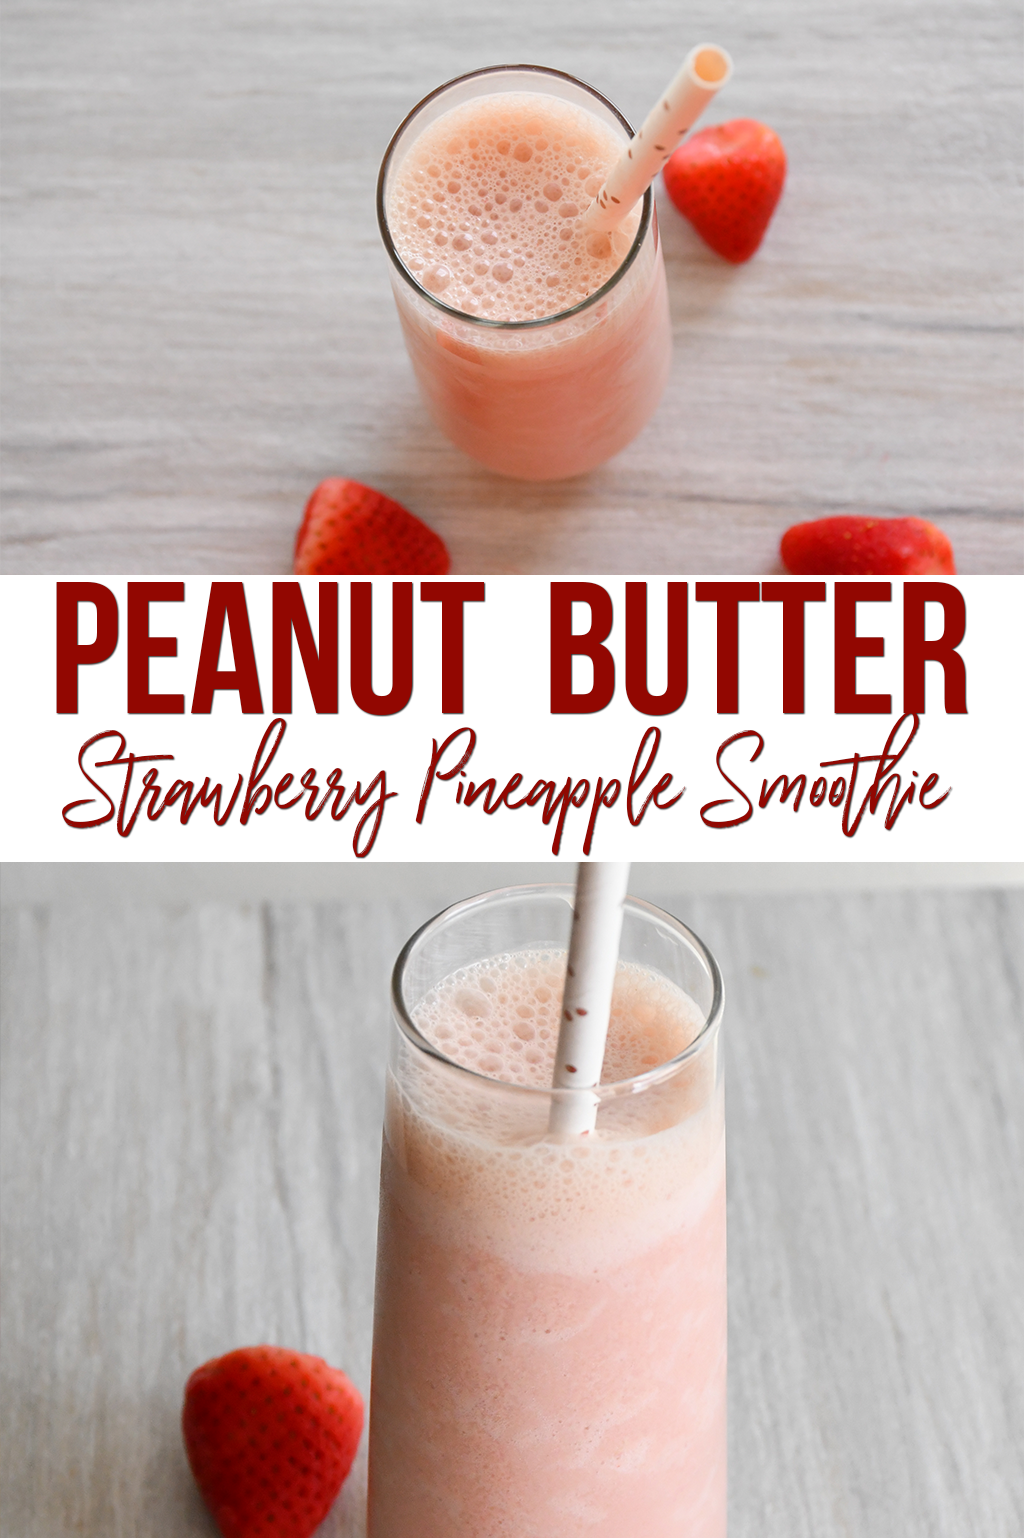 How to make a Peanut Butter Strawberry Pineapple Smoothie #smoothie #peanutbuttersmoothie #strawberrysmoothie